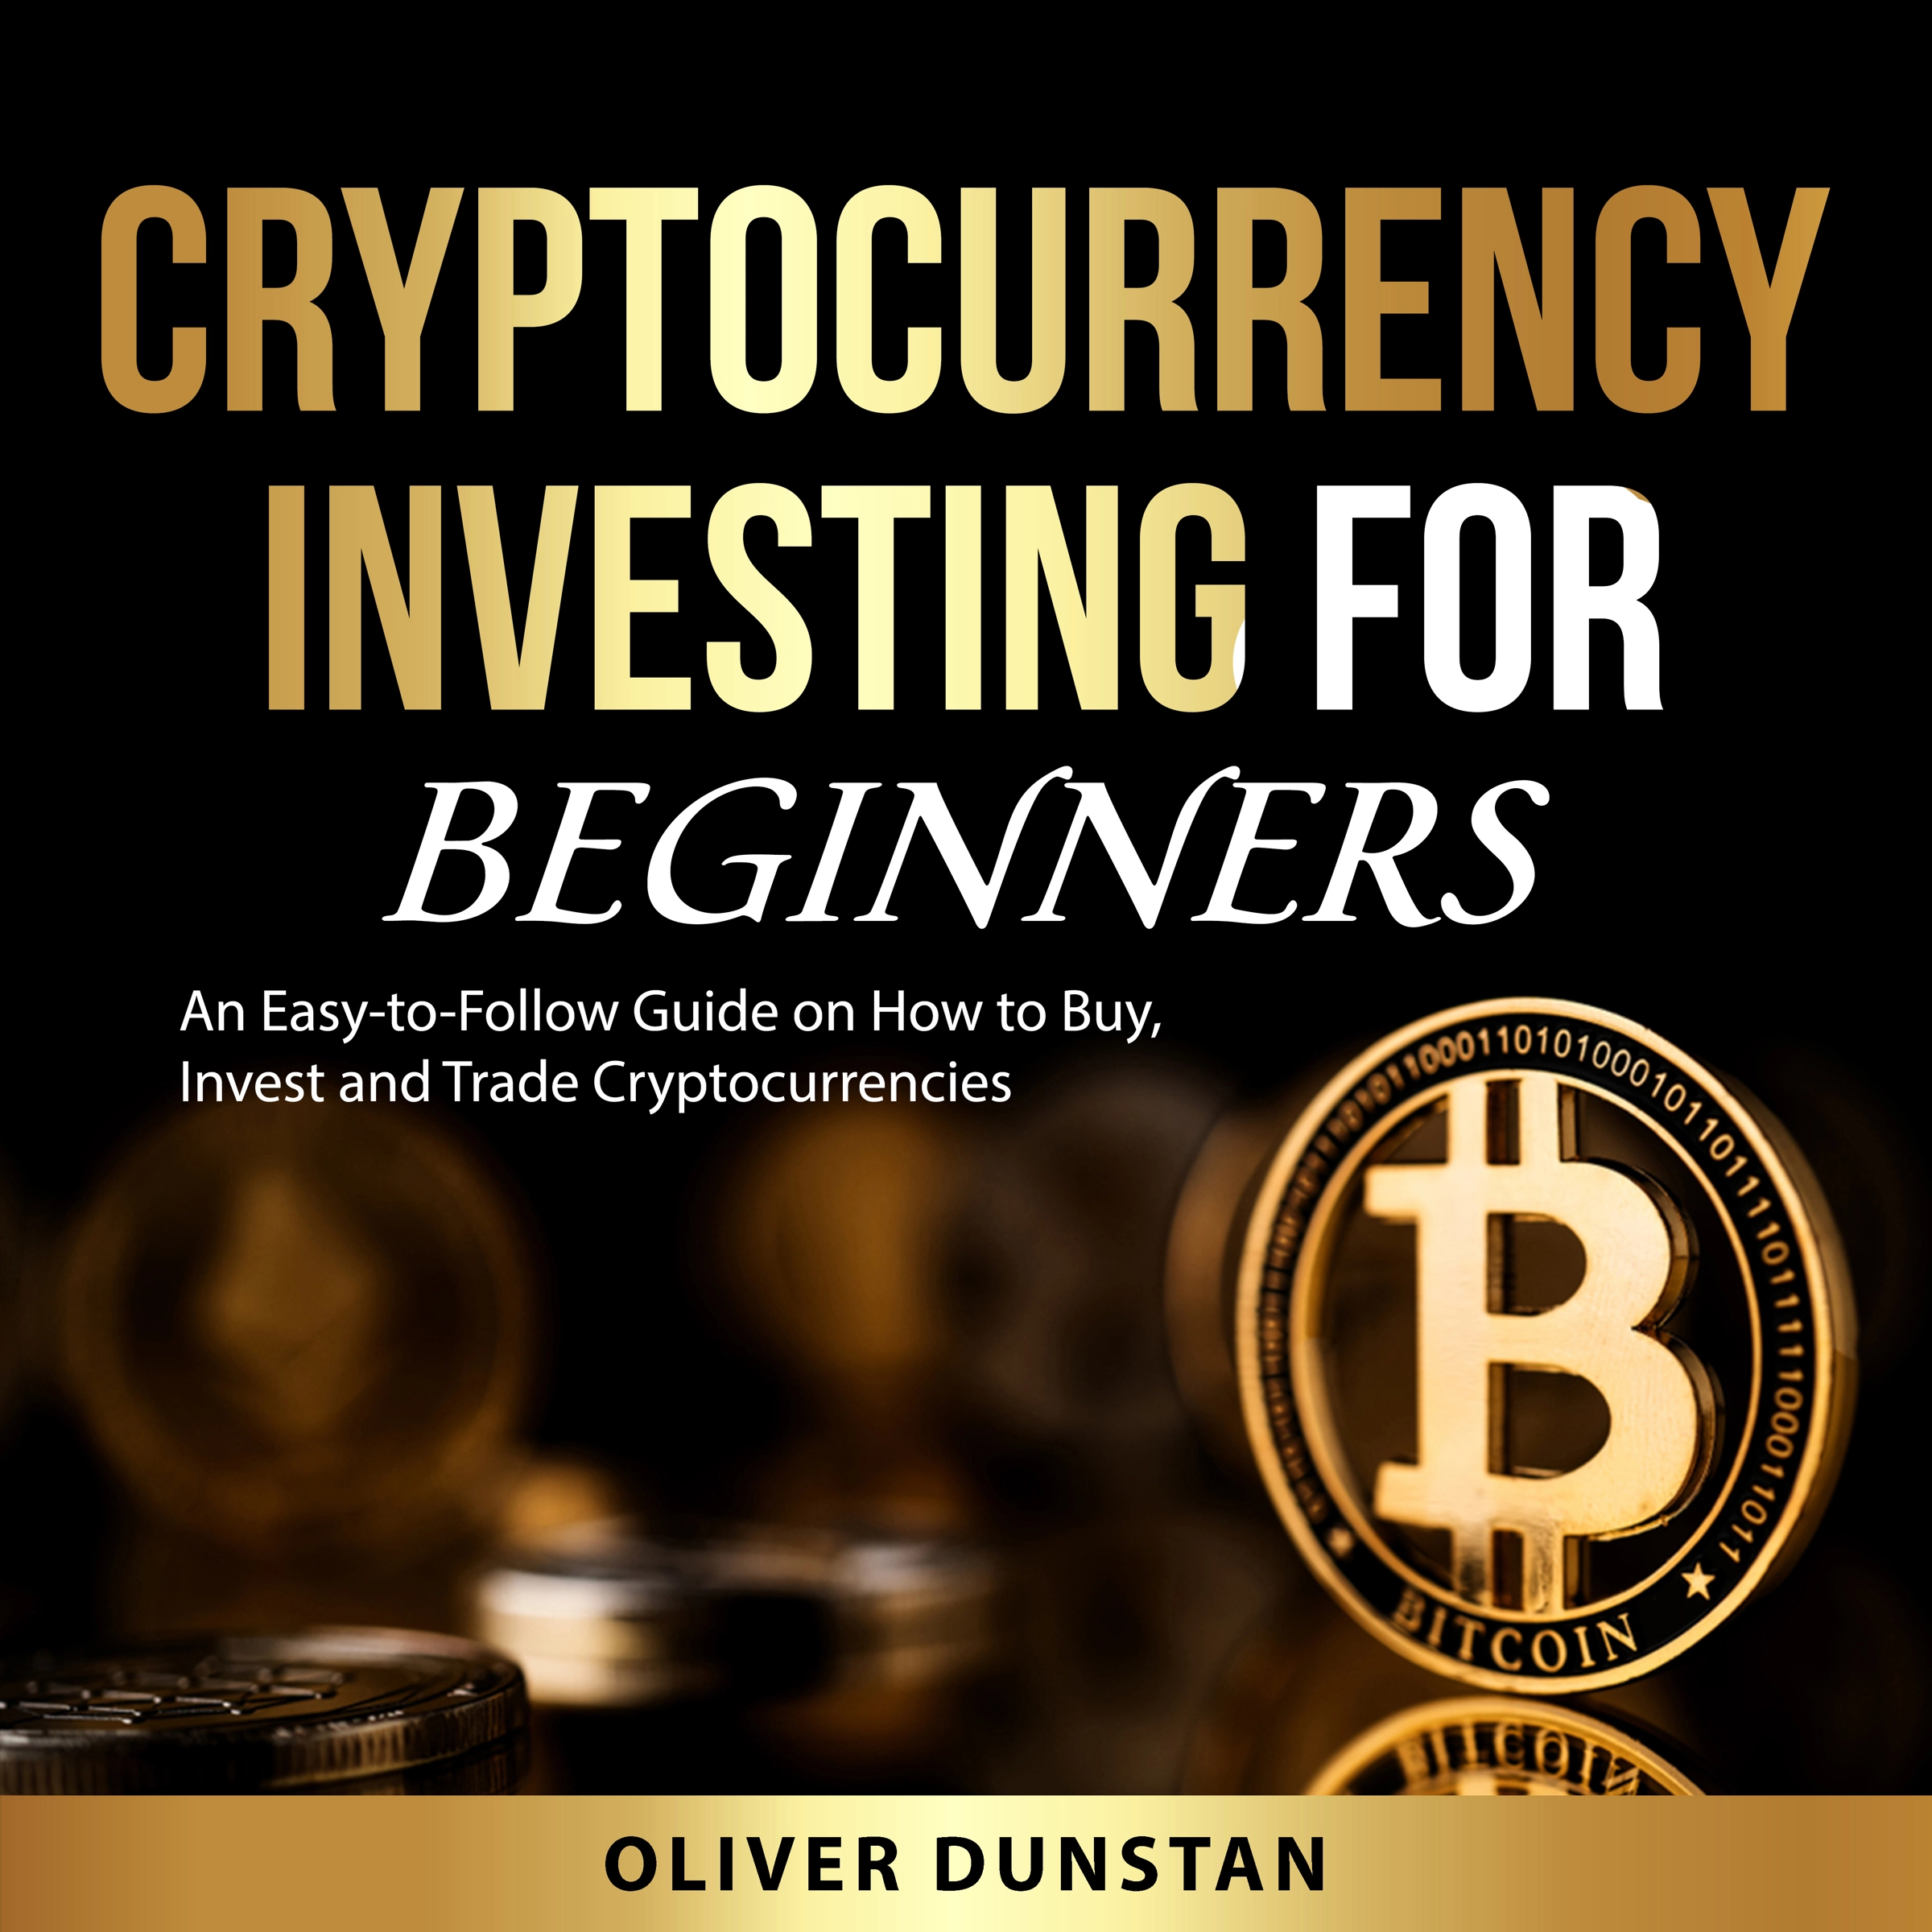 Cryptocurrency Investing for Beginners by Oliver Dunstan Audiobook